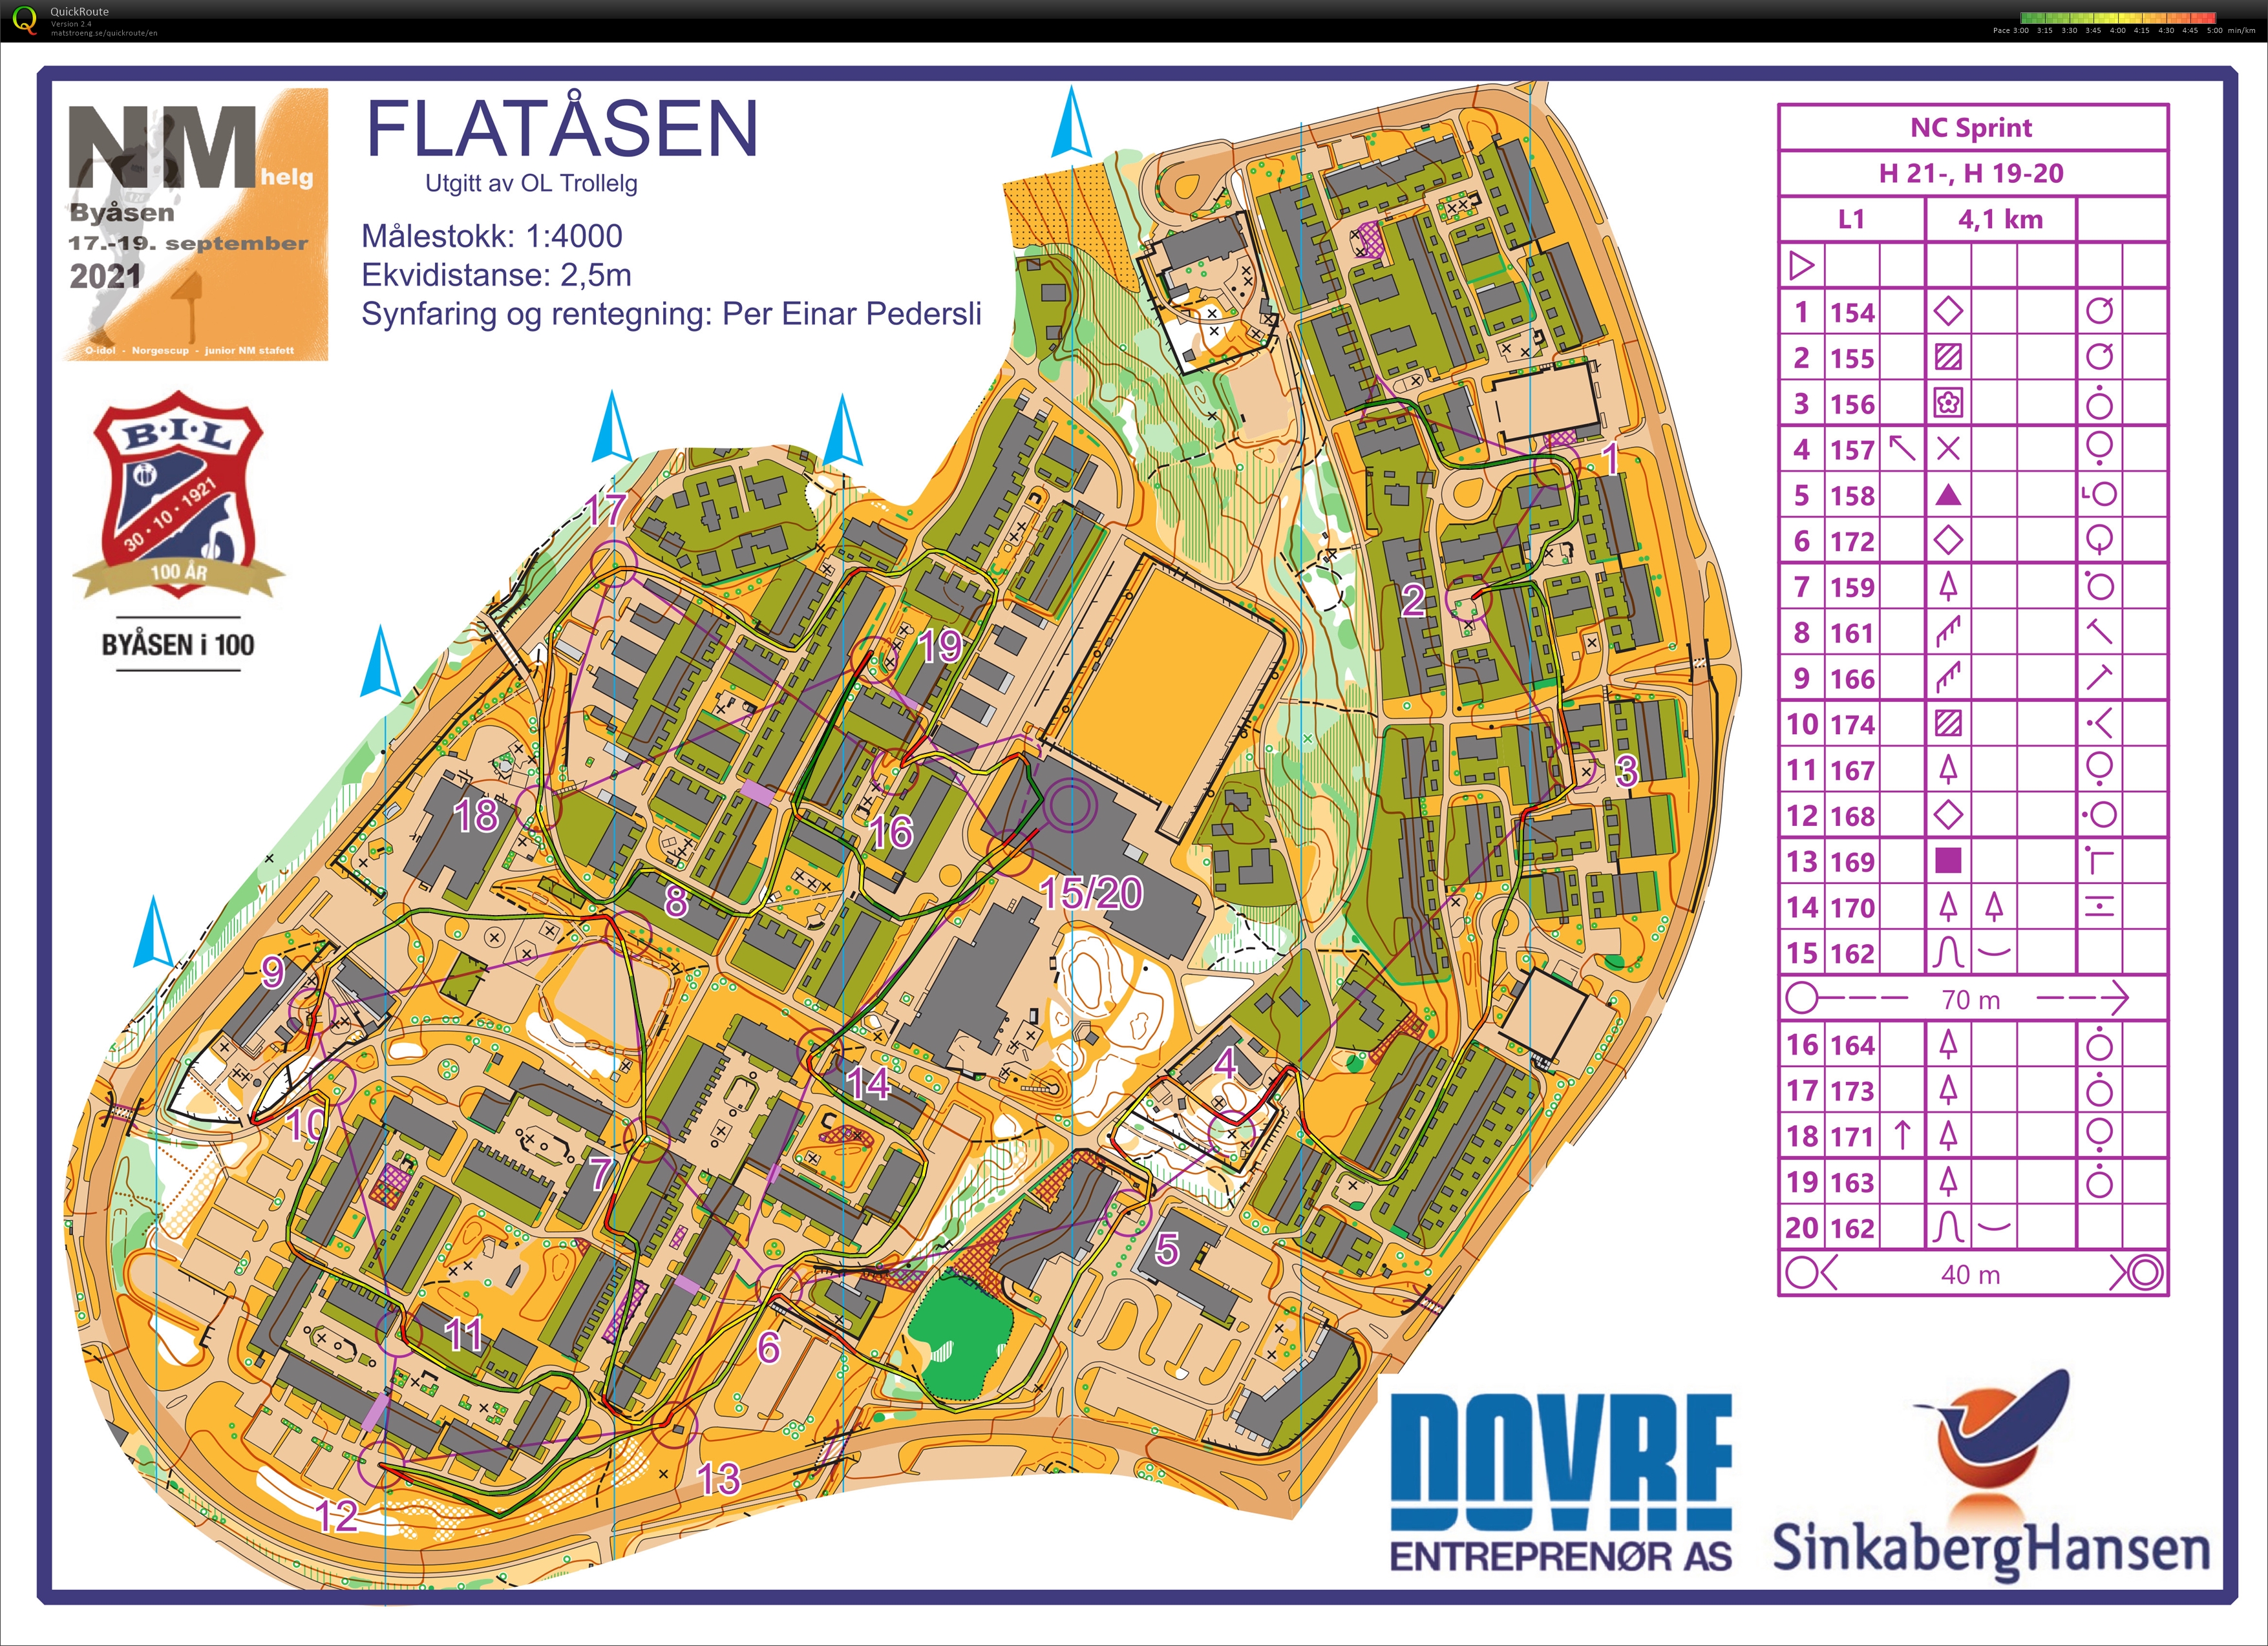 Norgescup Sprint (17.09.2021)